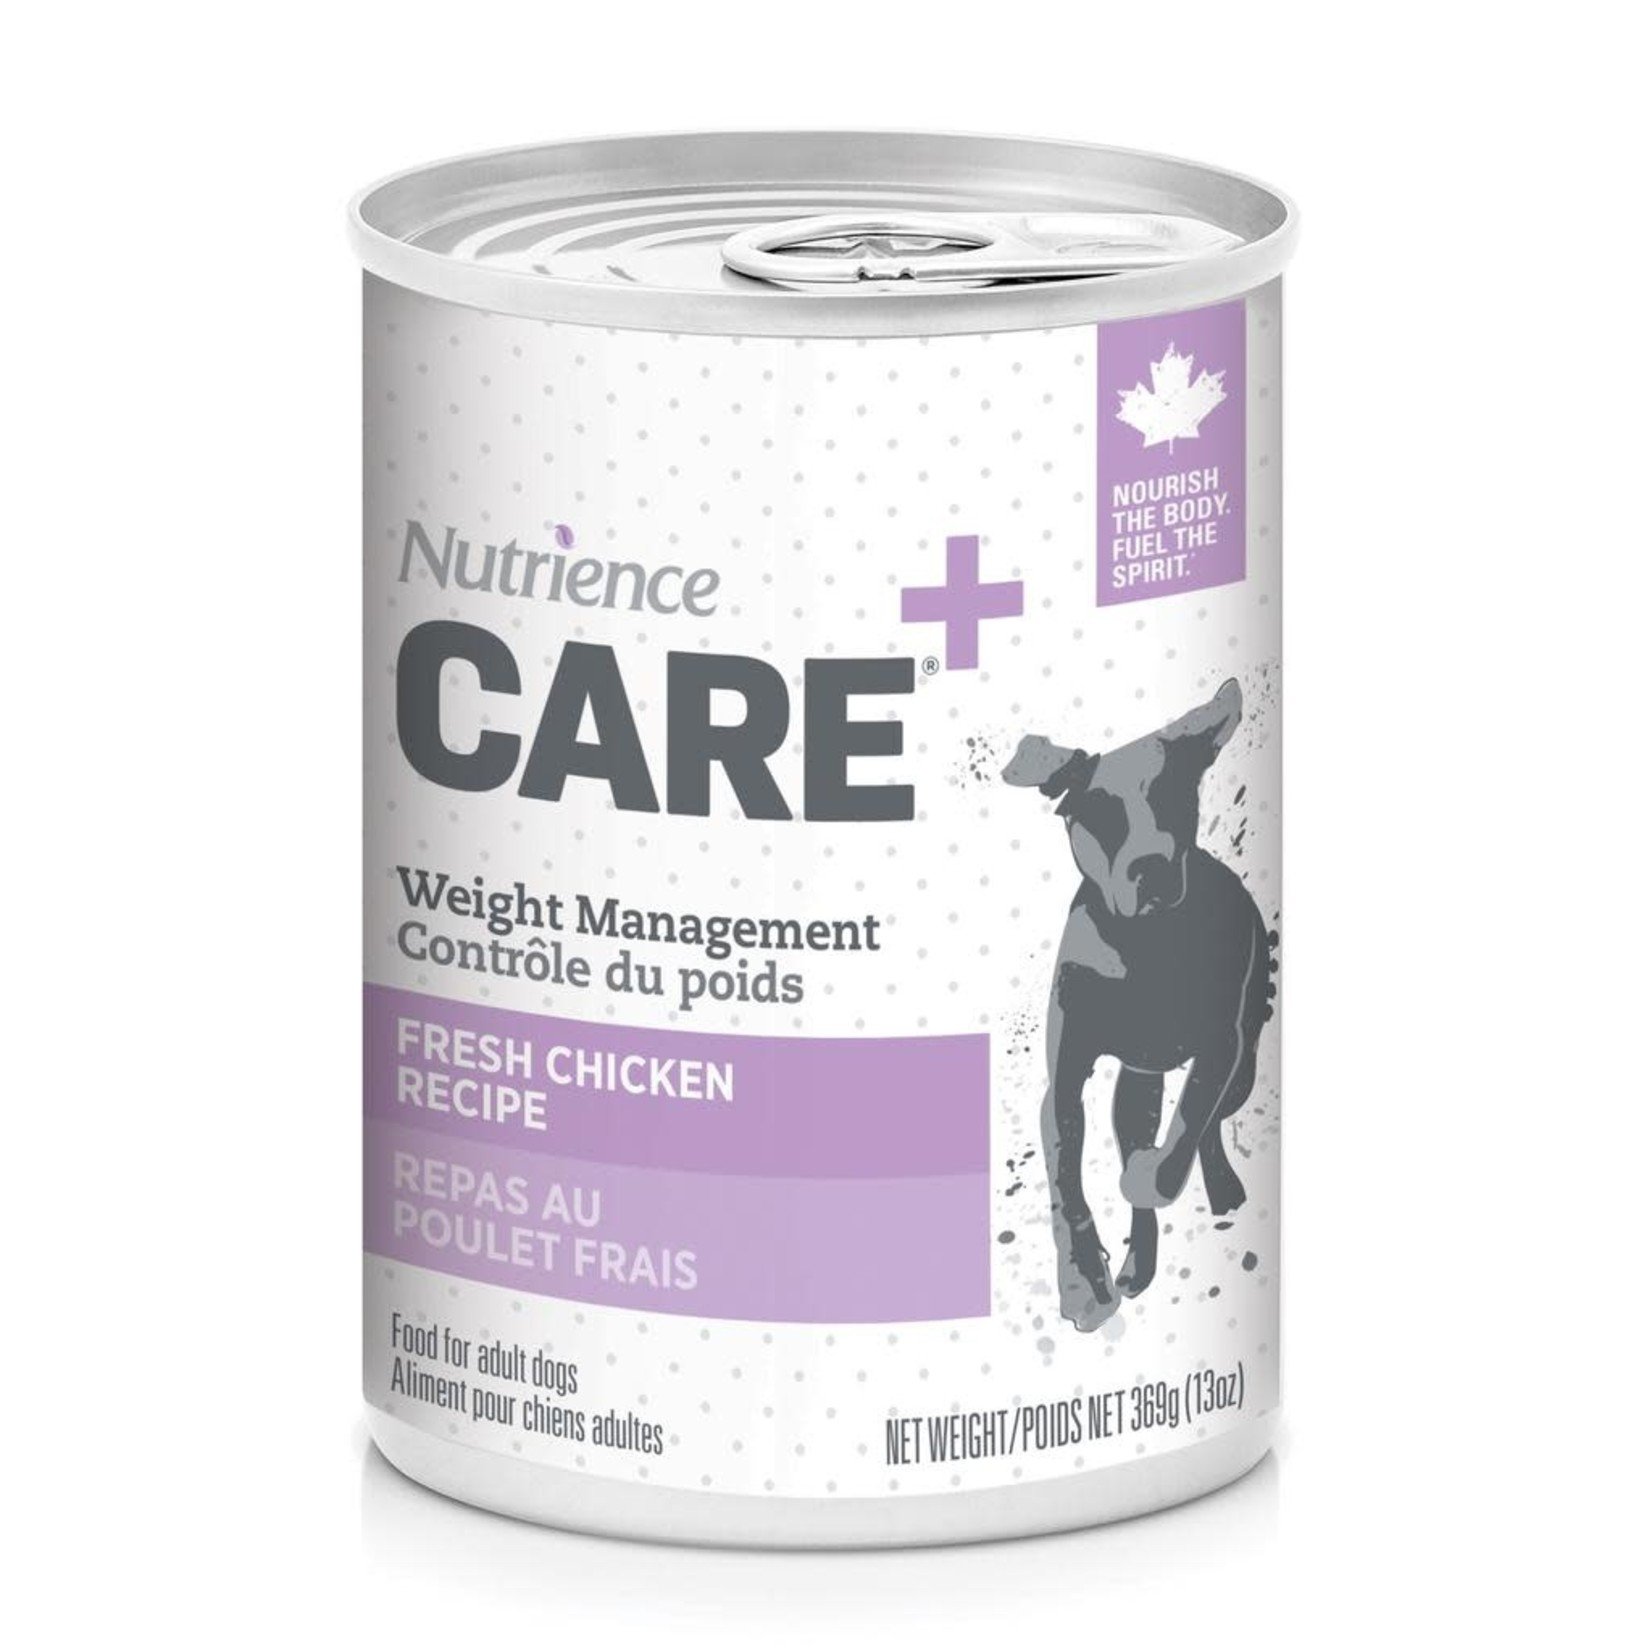 NUTRIENCE Nutrience Care Dog Weight Management Can, 369g